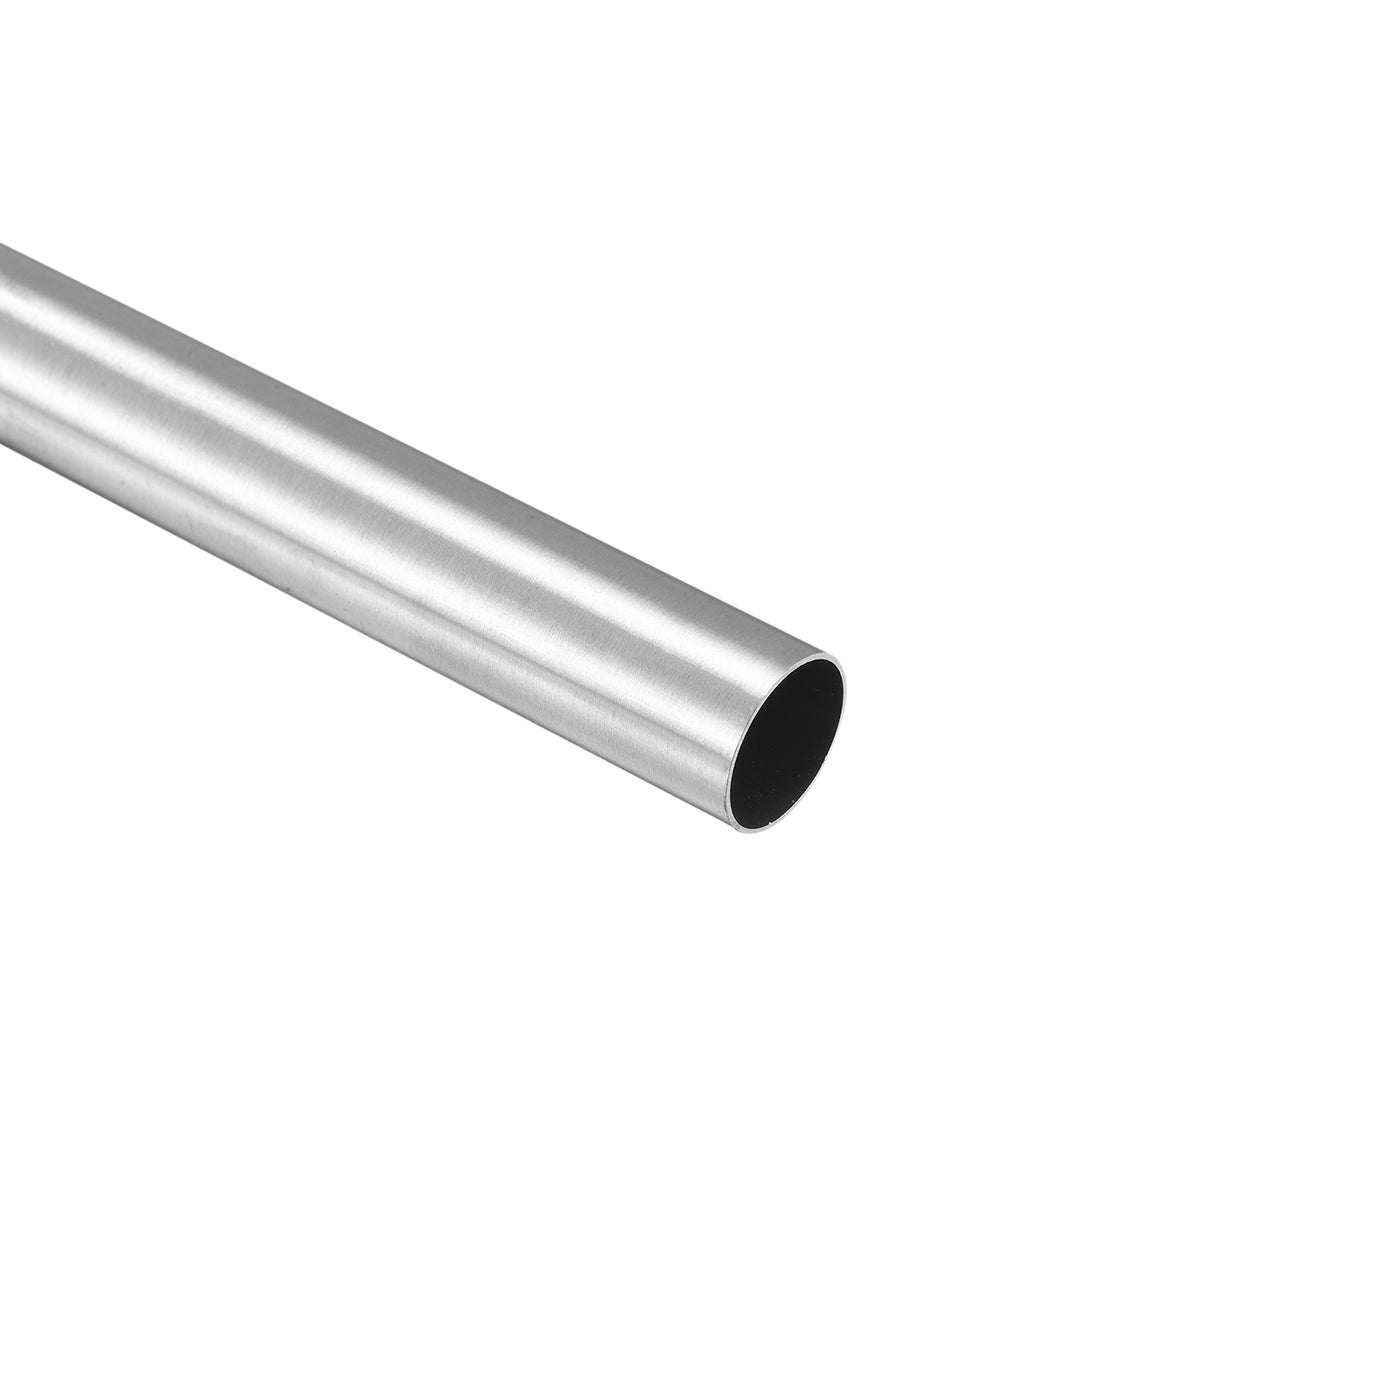 Uxcell Uxcell 304 Stainless Steel Round Tube 16mm OD 0.5mm Wall Thickness 250mm Length